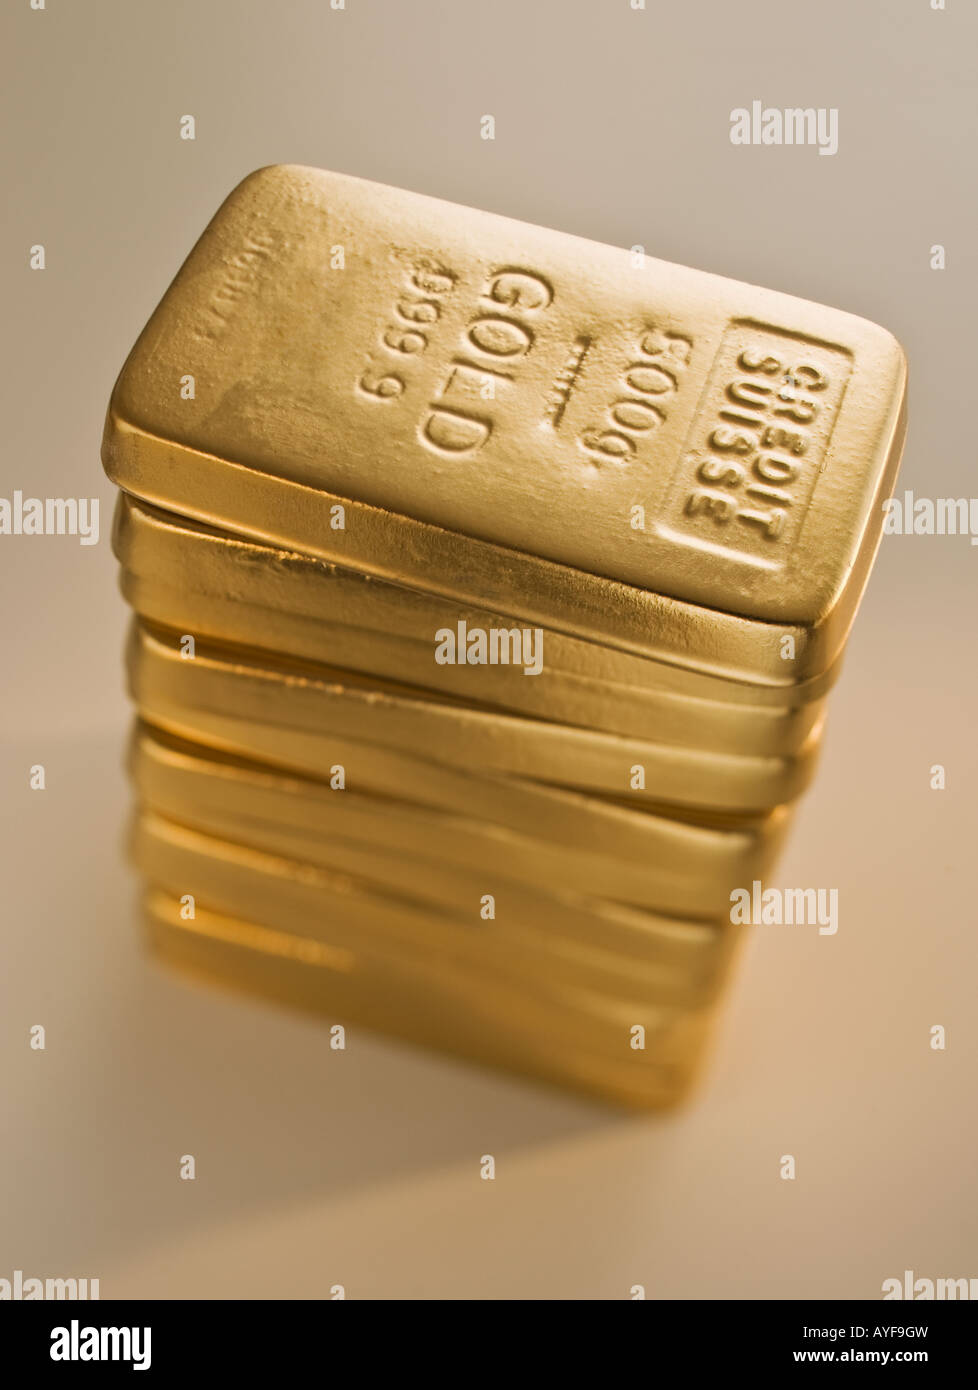 Stack of gold bars Stock Photo